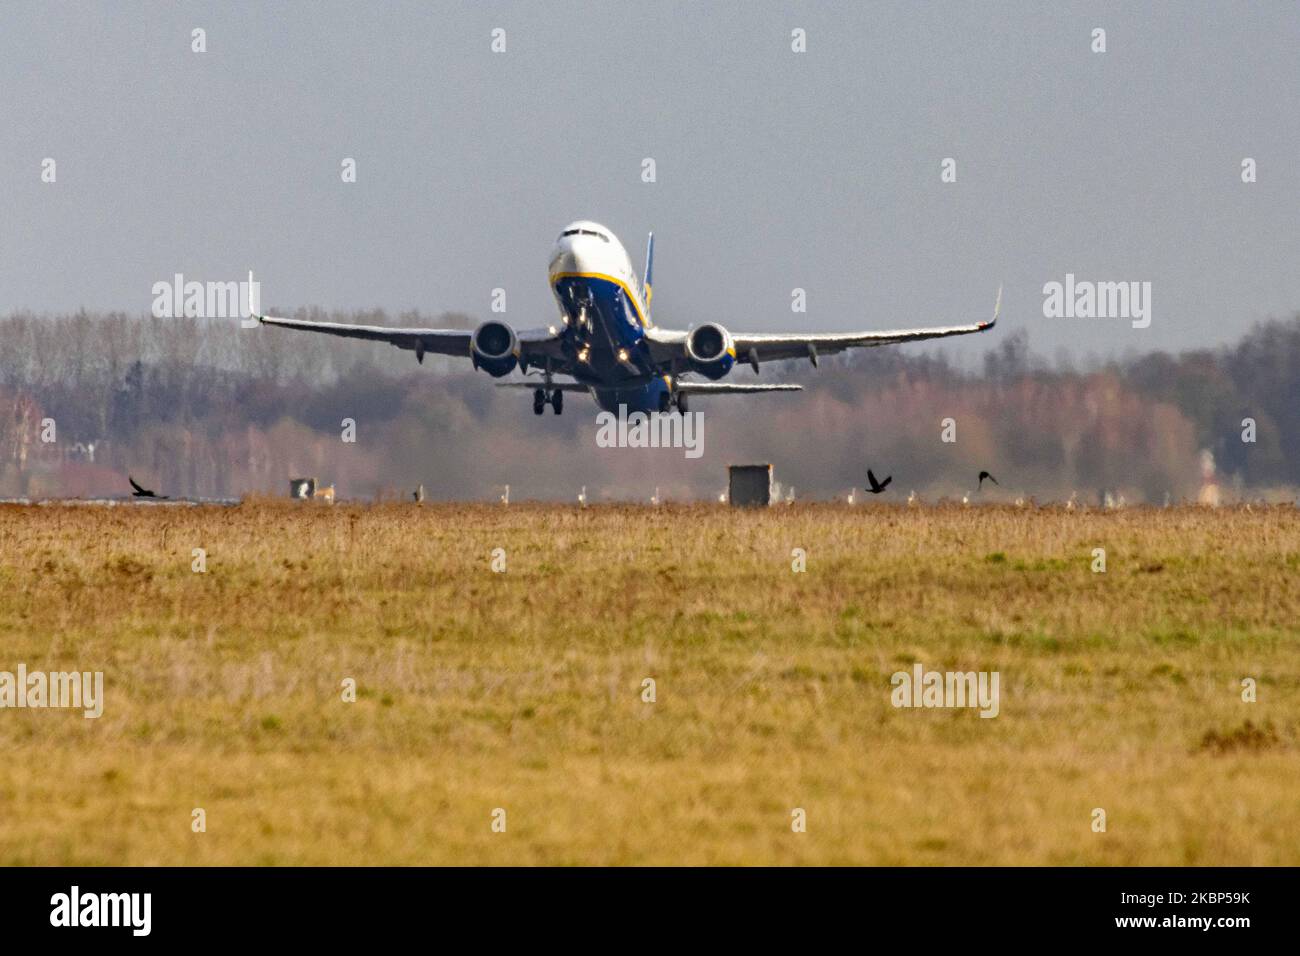 A Ryanair Boeing 737-800 commercial aircraft as seen during takeoff rotating and flying off the runway at Eindhoven EIN EHEH airport in the Netherlands. The narrow body Boeing 737NG airplane has the registration EI-ENJ. Ryanair RYR FR is an Irish budget airline, the largest European low cost carrier with headquarters in Dublin, Irelands. February 2020 (Photo by Nicolas Economou/NurPhoto) Stock Photo